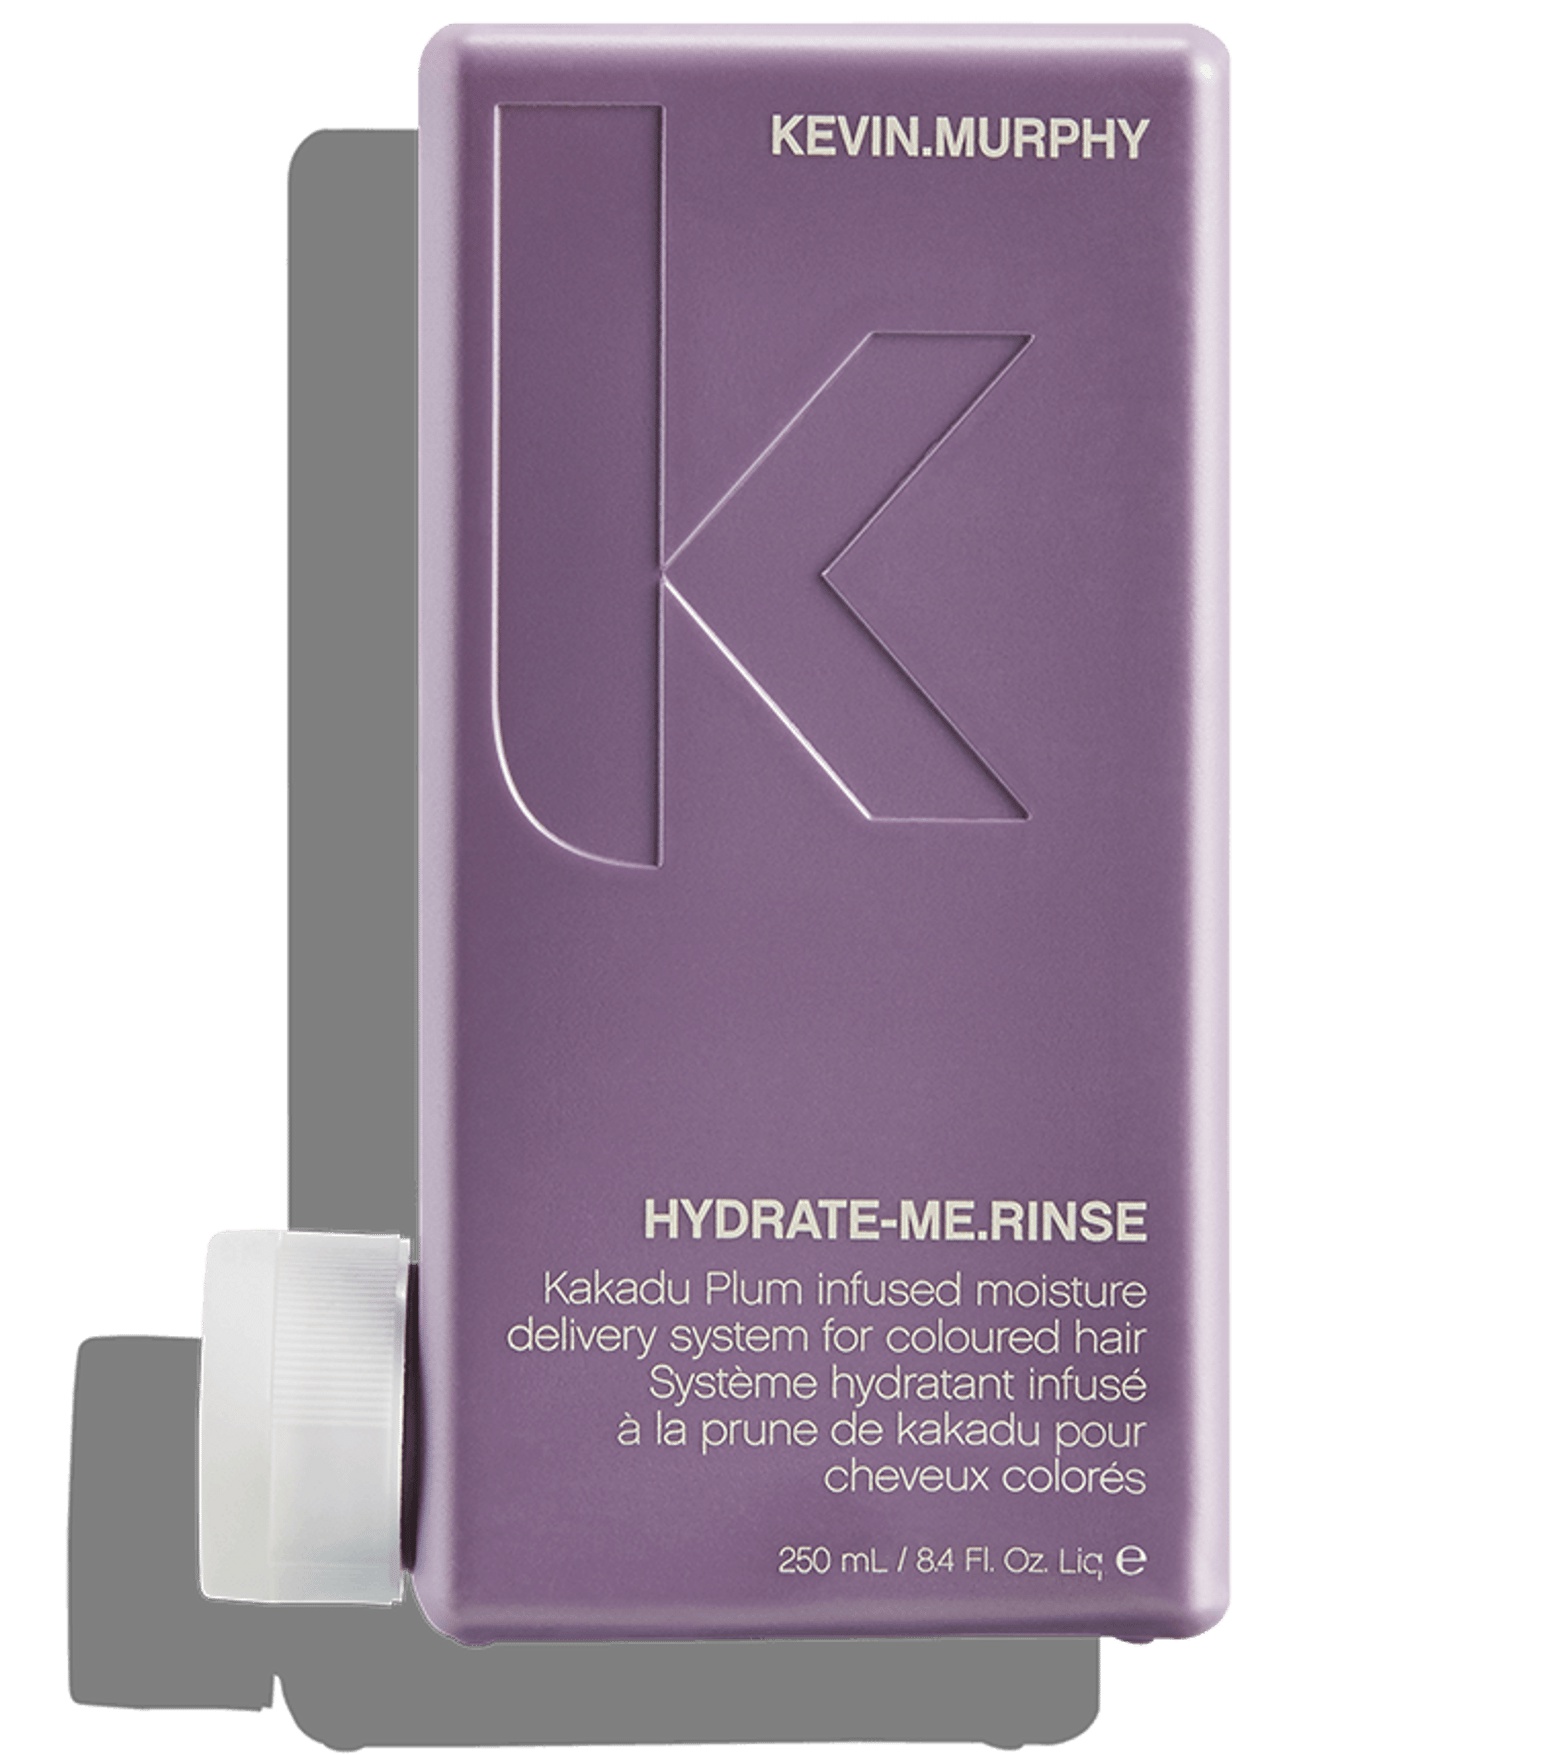 Kevin Murphy Hydrate-me.rinse